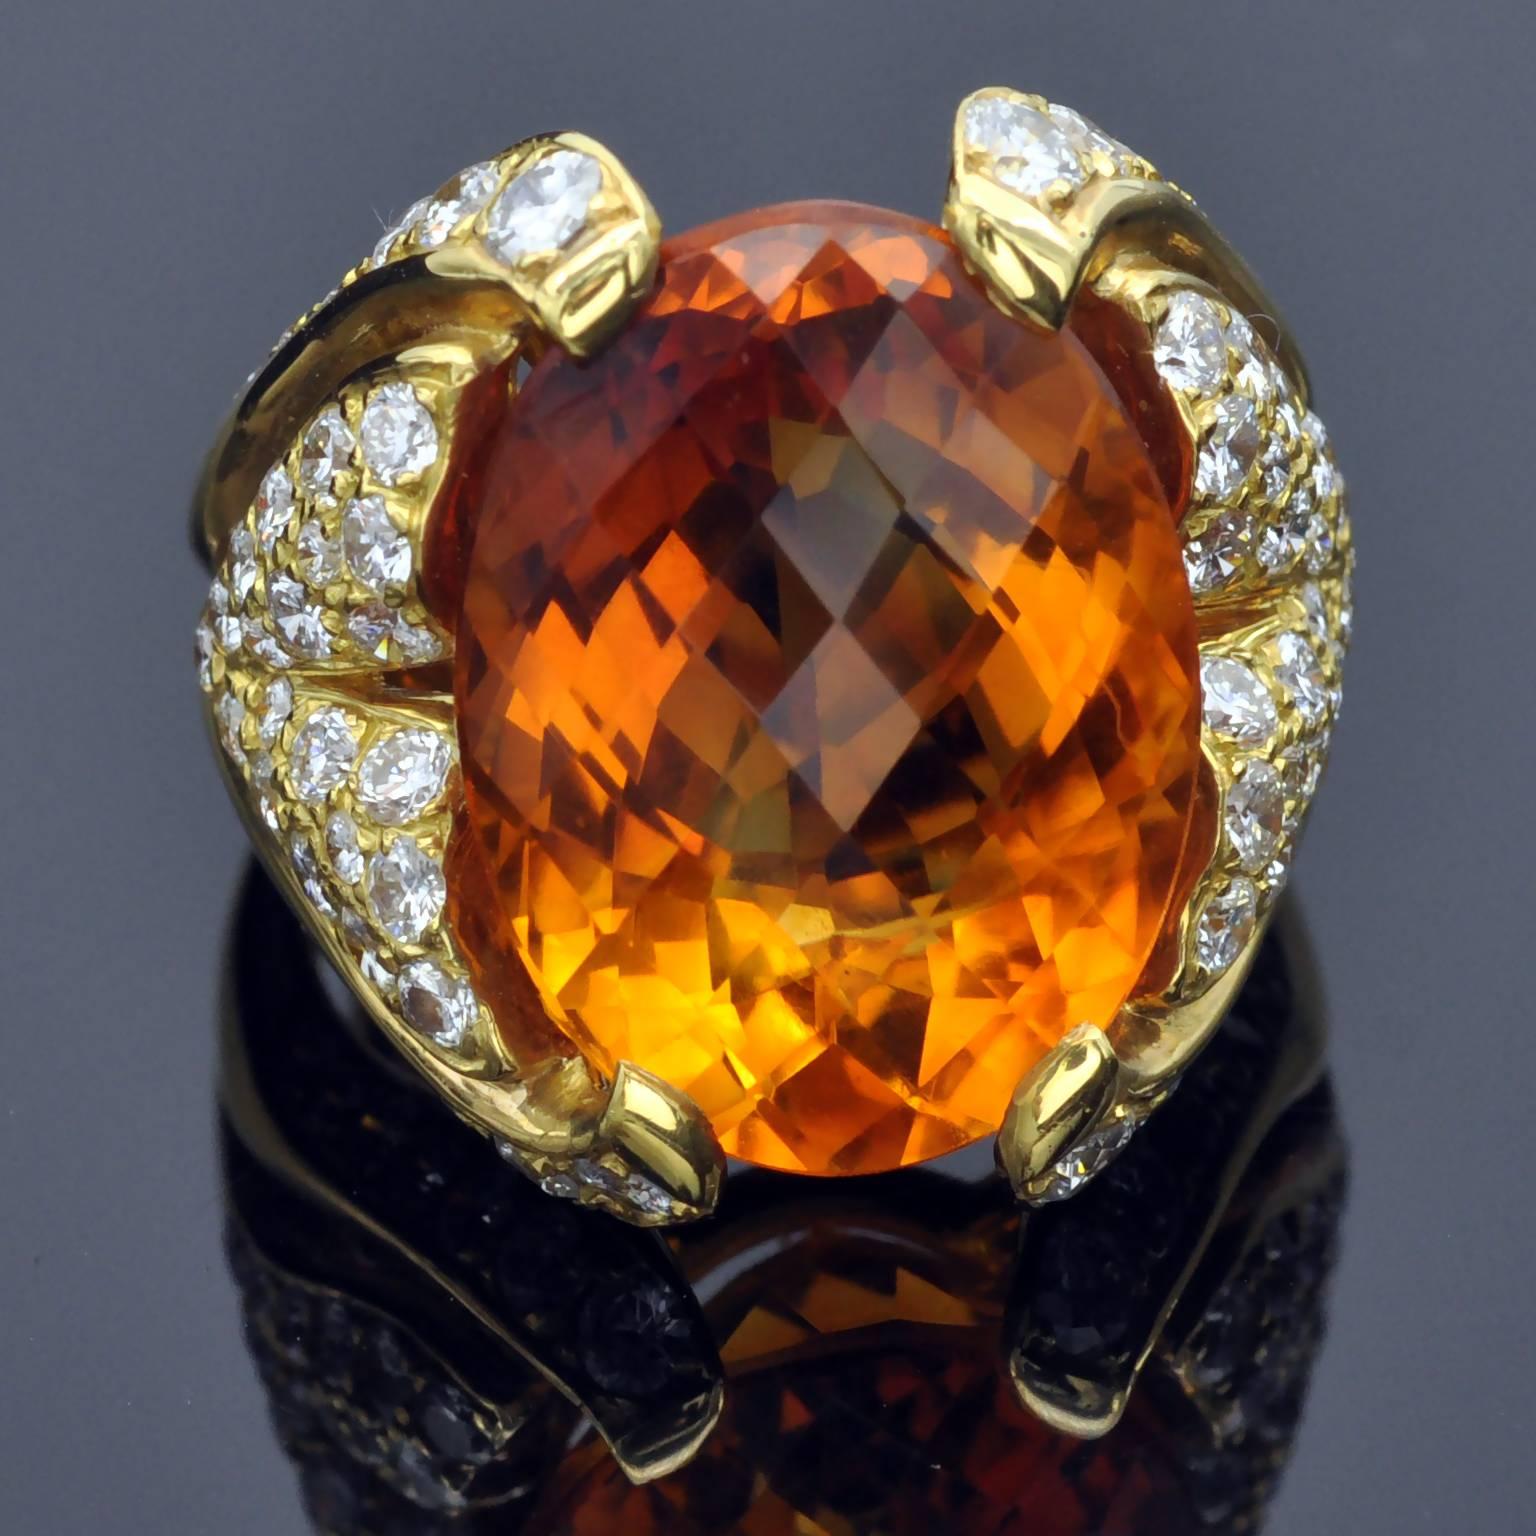 Important cocktail ring. The center citrine is fully facetted, top and bottom, making it sparkle in a fascinating way.  the body of the ring, a diamond set leaf like motif hold the central stone buy the sides only leaving openings to see its beauty.